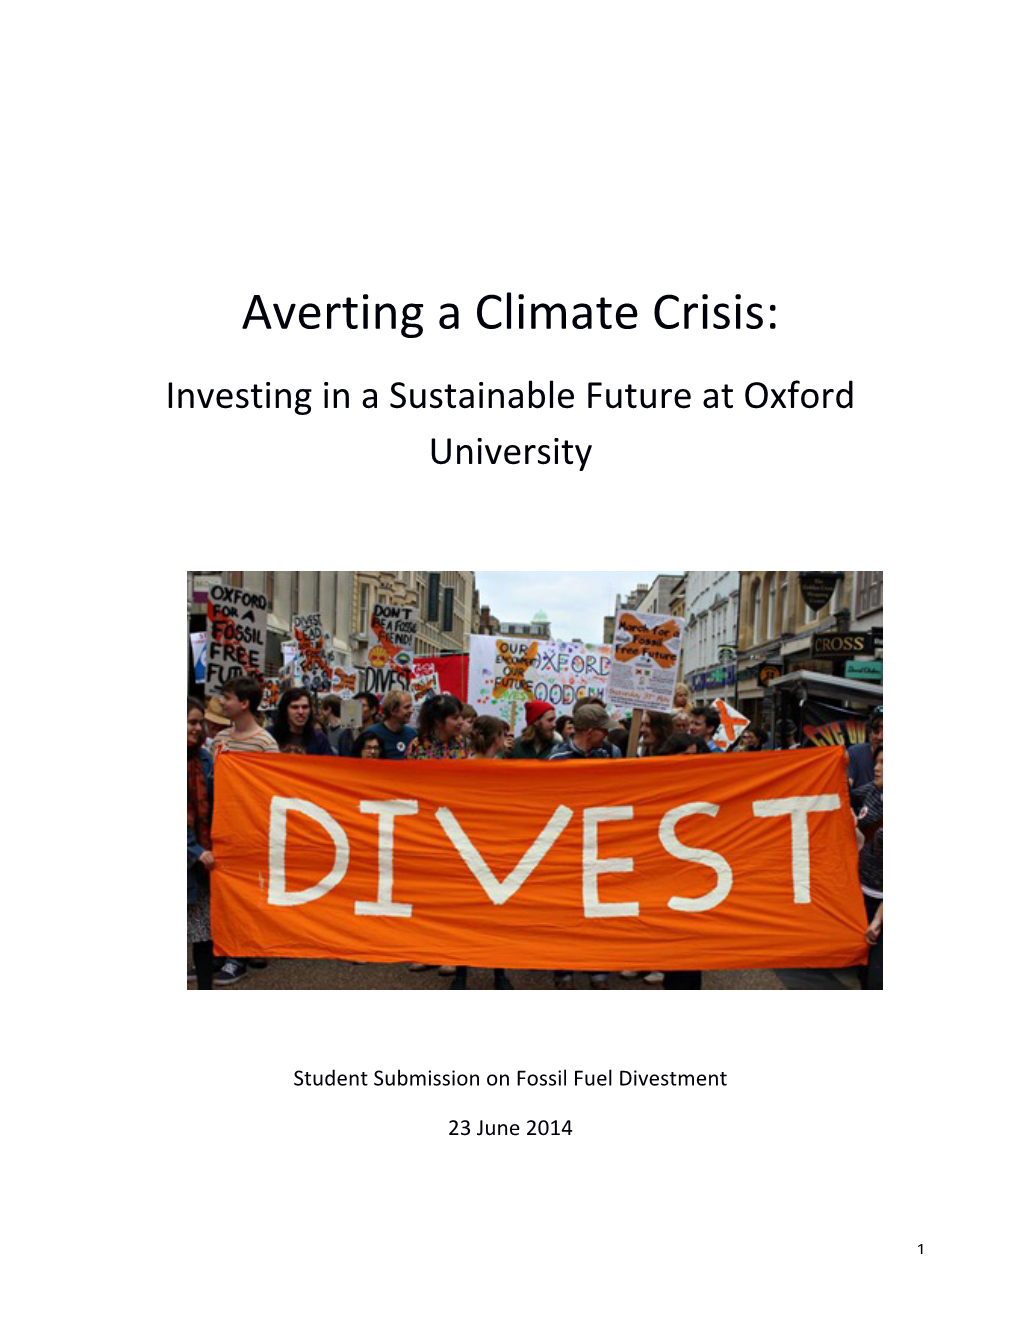 Averting a Climate Crisis: Investing in a Sustainable Future at Oxford University